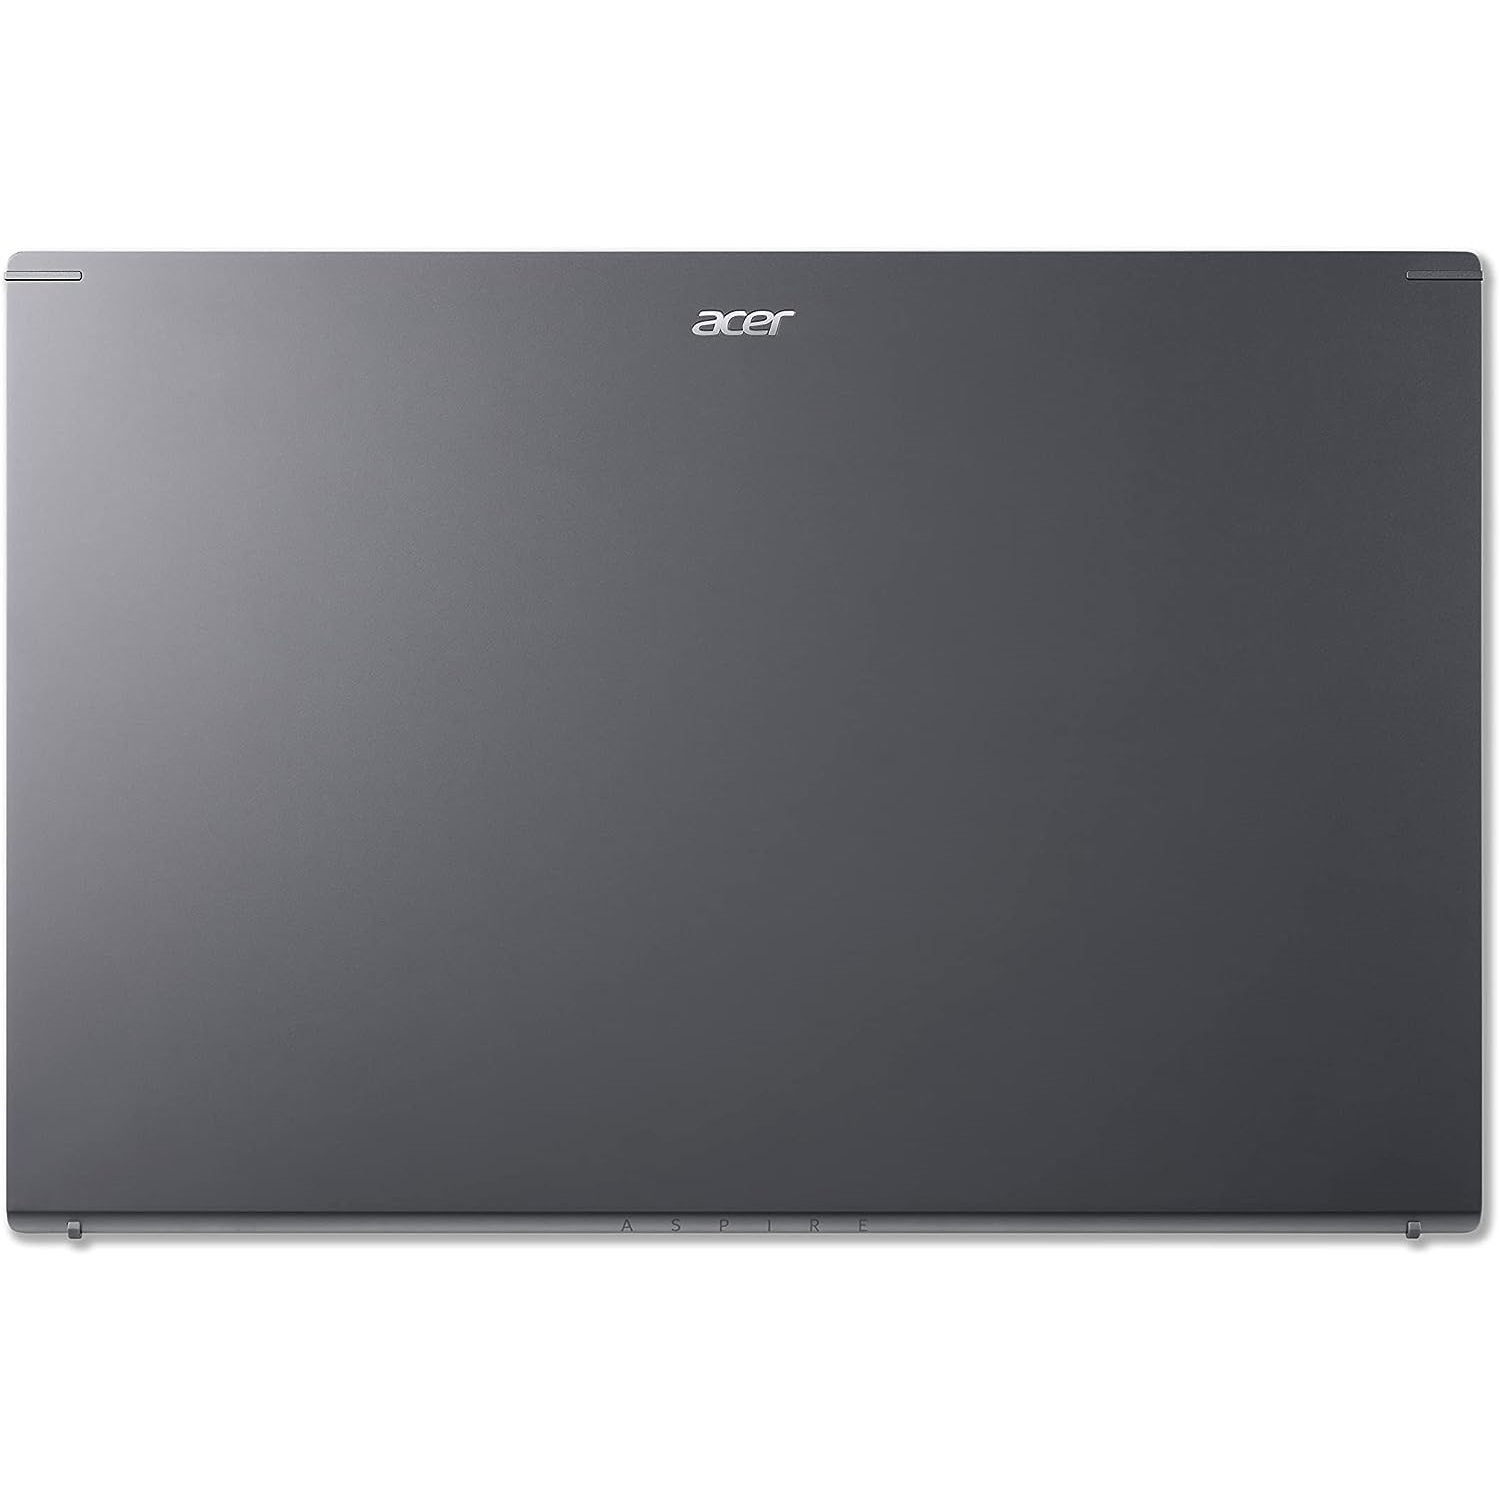 ACER%20ASPİRE%205%20A515-47-R739%20NX.K80EY.003%20RYZEN%205%205625U%208GB%20512GB%20SSD%20O/B%20VGA%2015.6’’%20FHD%20FREEDOS%20NOTEBOOK